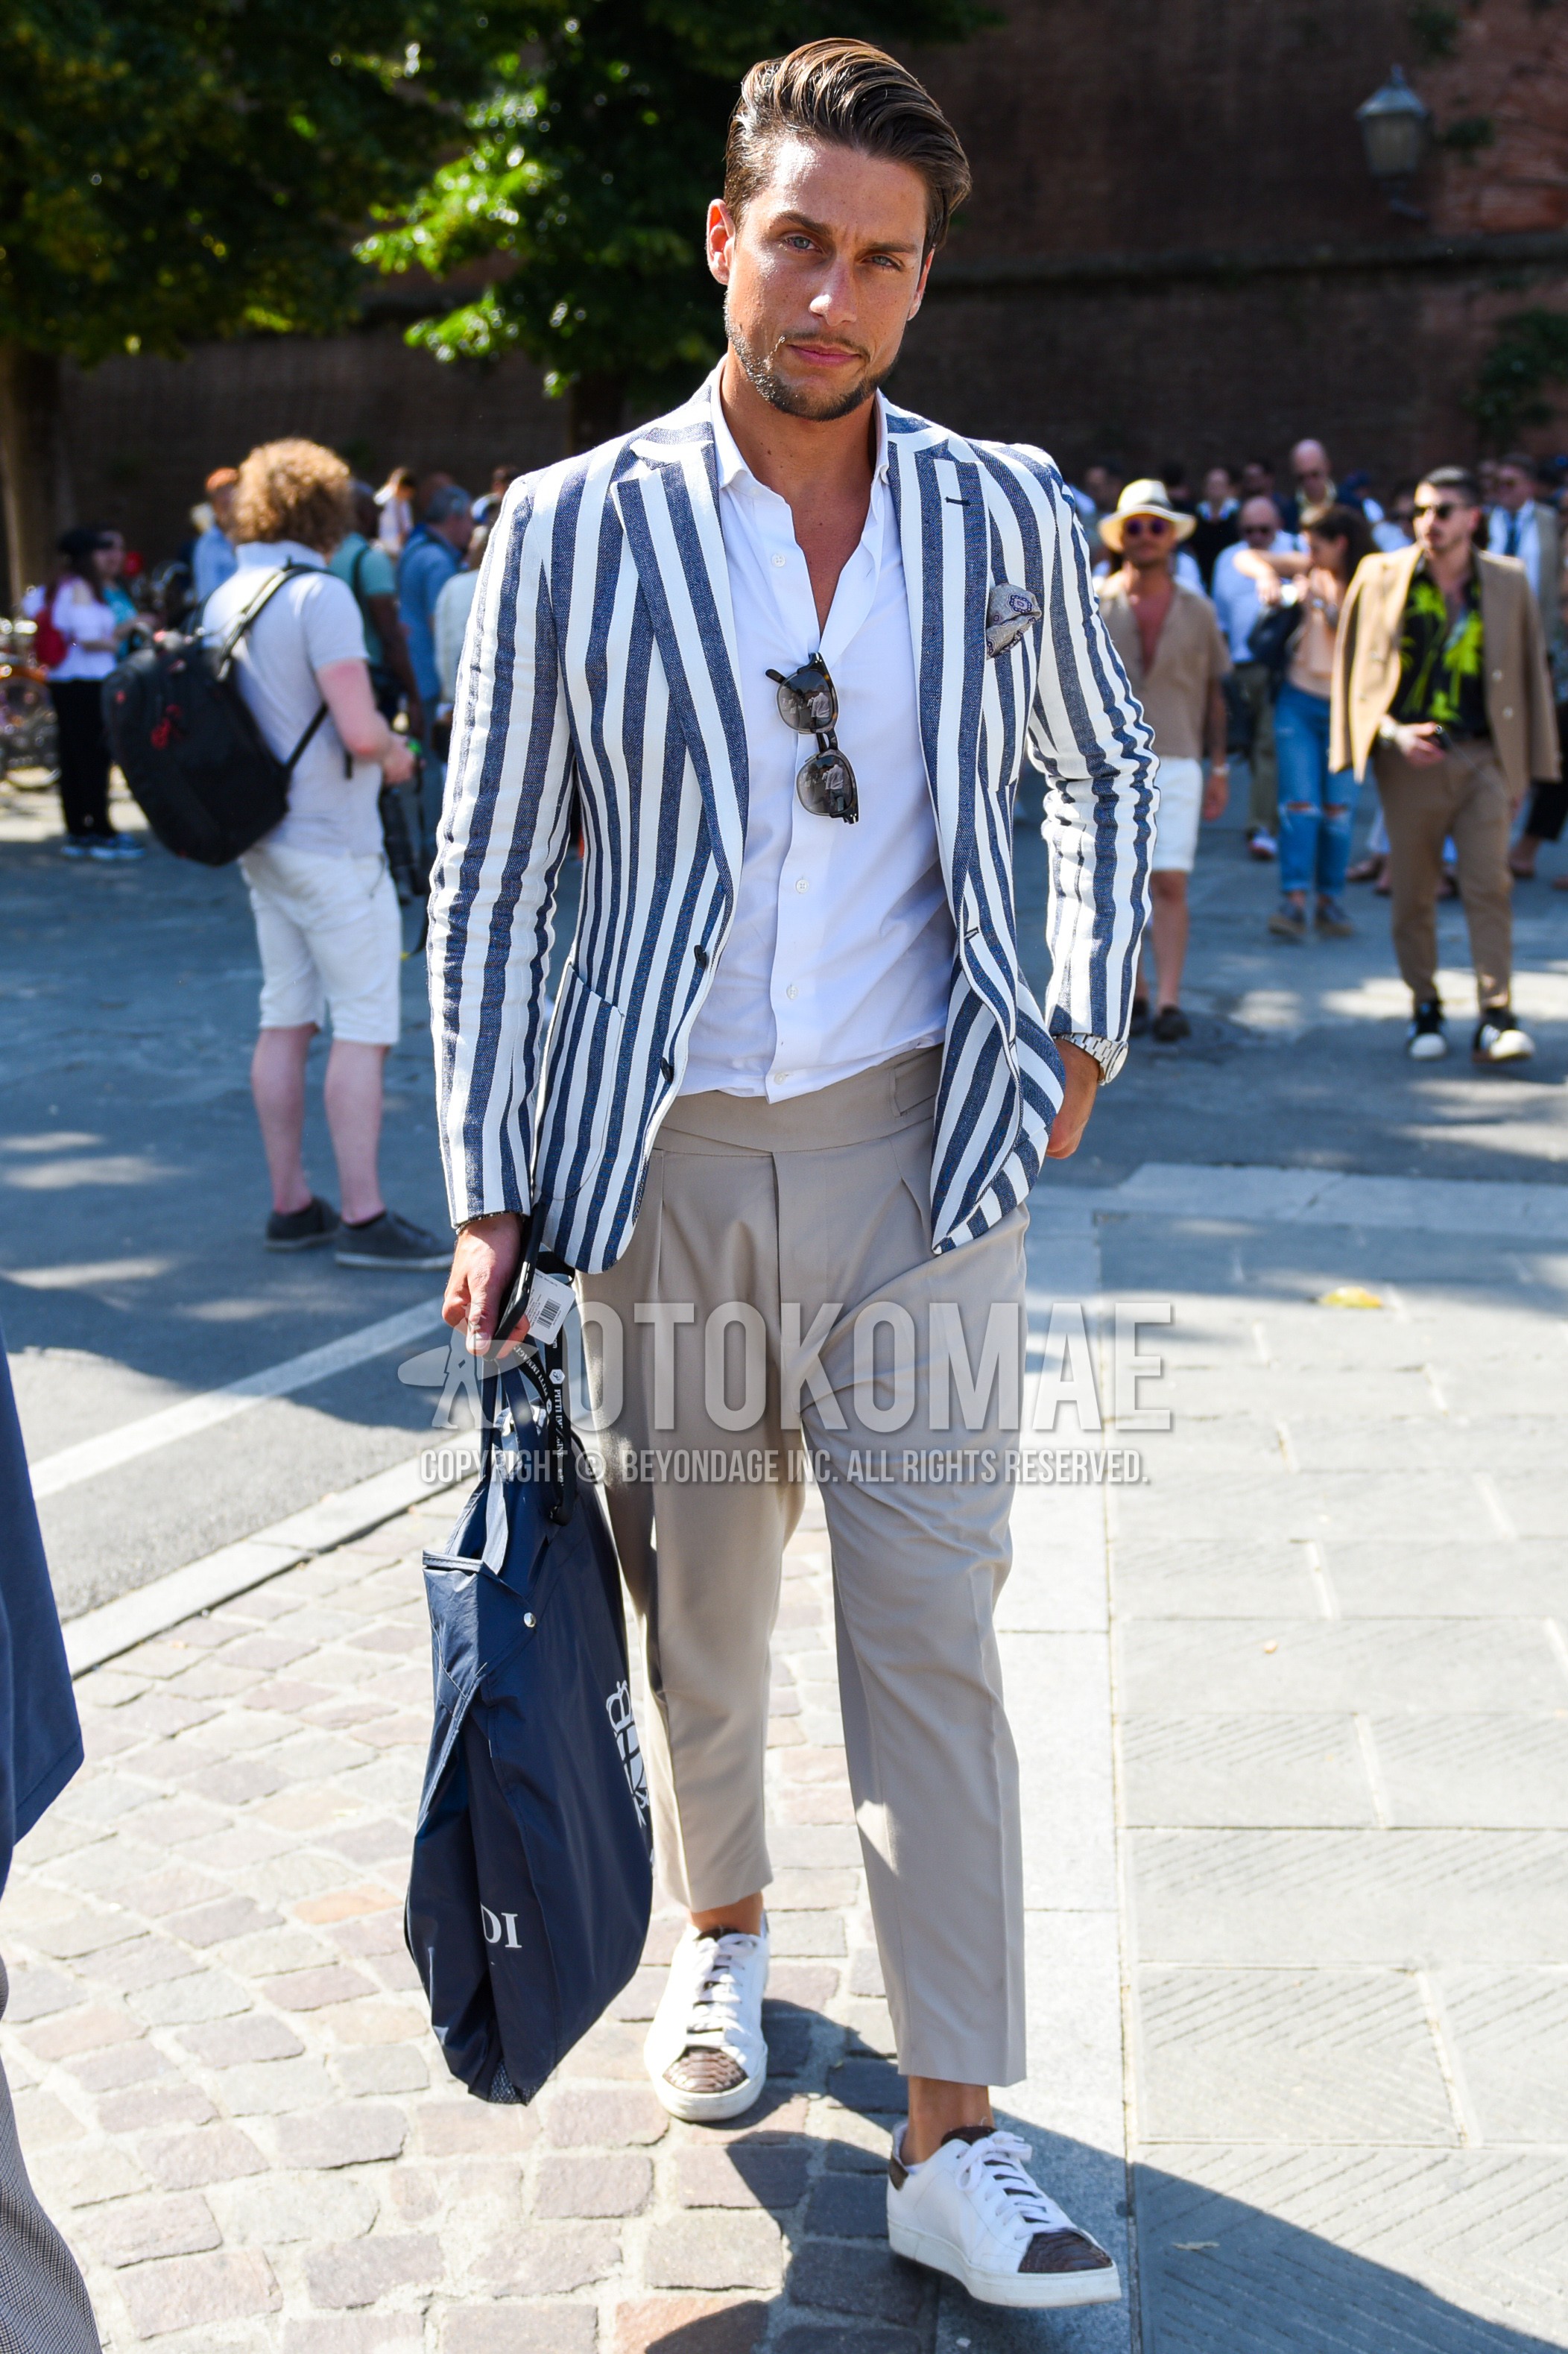 Men's spring autumn outfit with white gray stripes tailored jacket, white plain shirt, beige plain beltless pants, white low-cut sneakers.